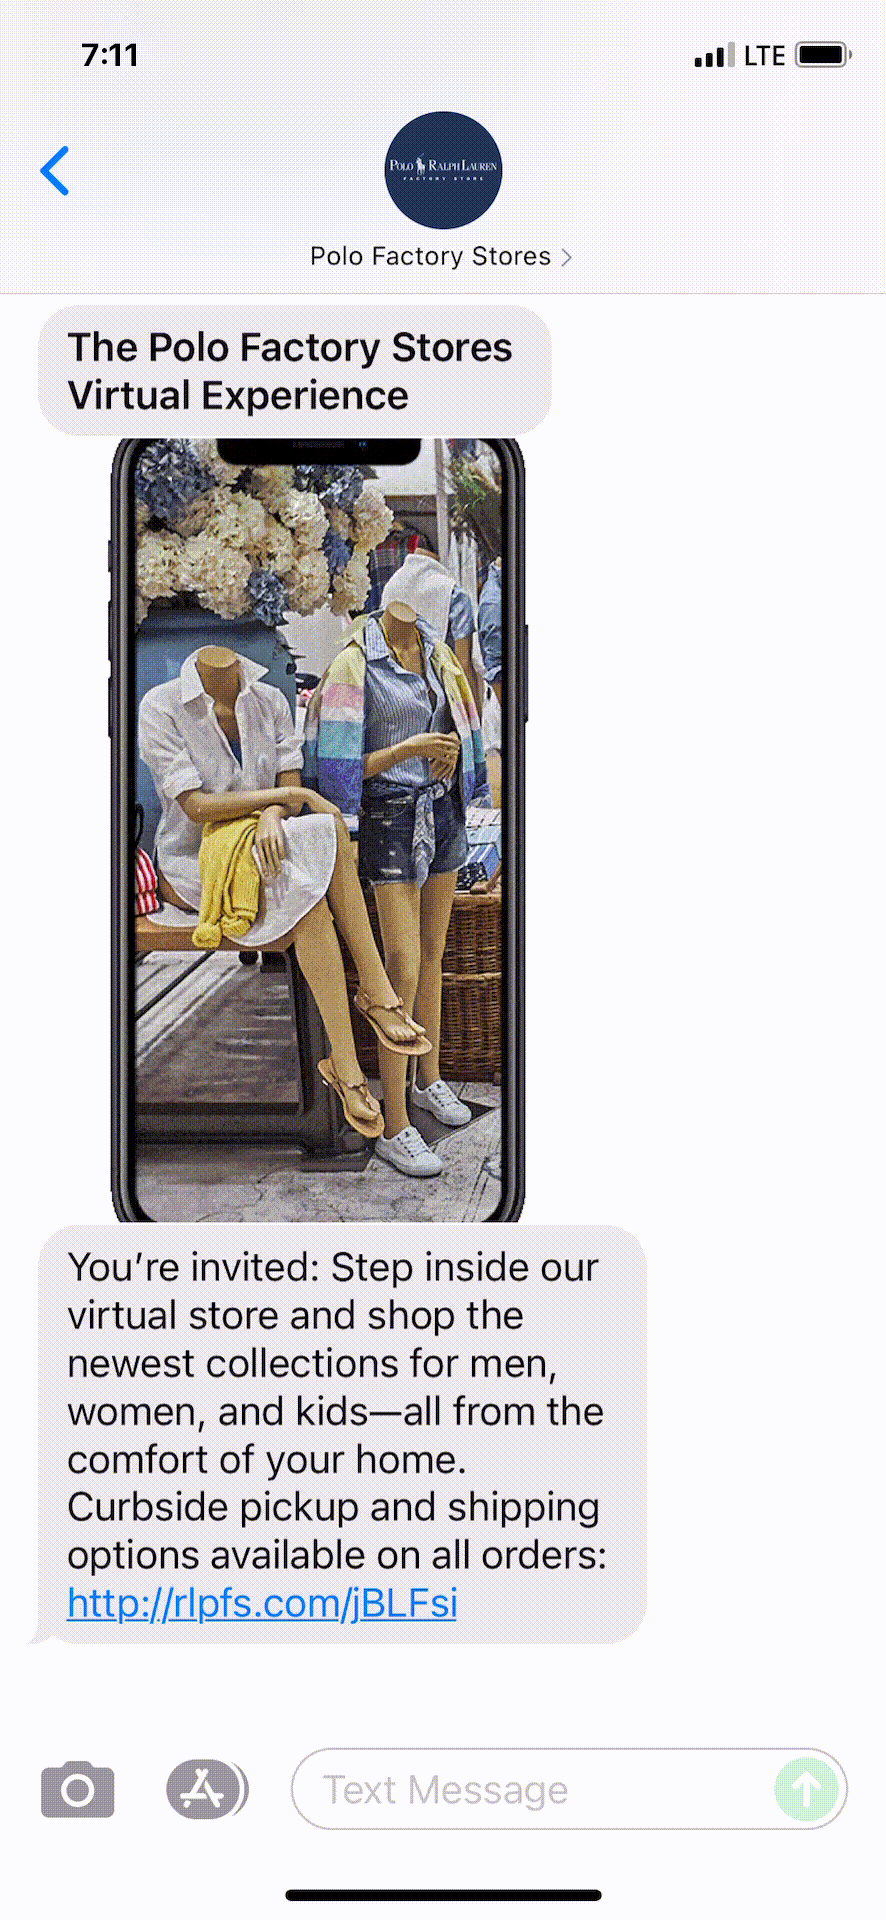 Polo-Factory-Stores-Text-Message-Marketing-Example-06.28.2021